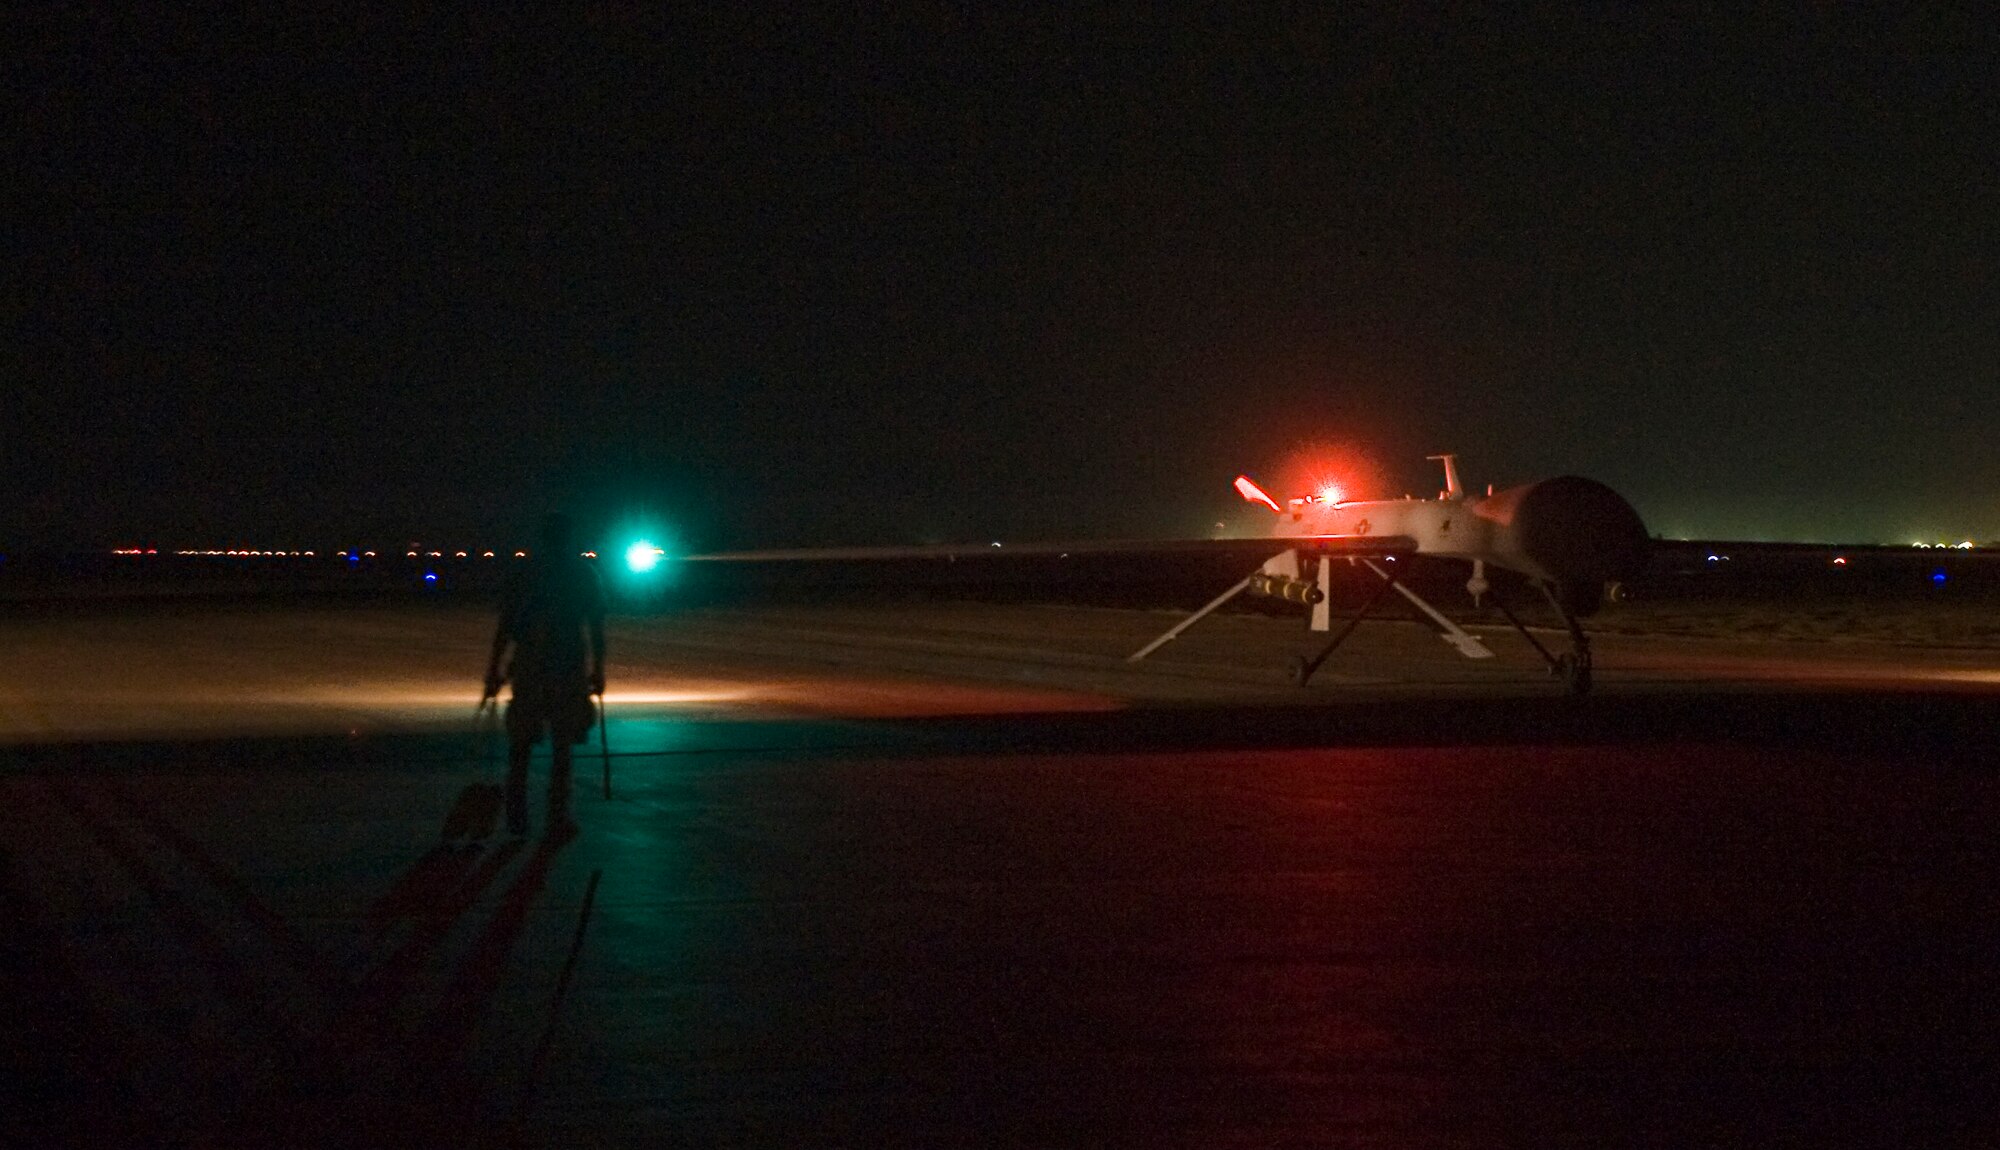 ALI BASE, Iraq -- An MQ-1B Predator unmanned aerial system, assigned to Detachment 1 46th Expeditionary Reconnaissance Attack Squadron, taxis in after a mission Sept. 3, 2008. Through the use of advanced capabilities, focused doctrine and detailed training, the Predator provides integrated and synchronized close air combat operations, to include intelligence, surveillance and reconnaissance. (U.S. Air Force photo/Airman 1st Class Christopher Griffin)